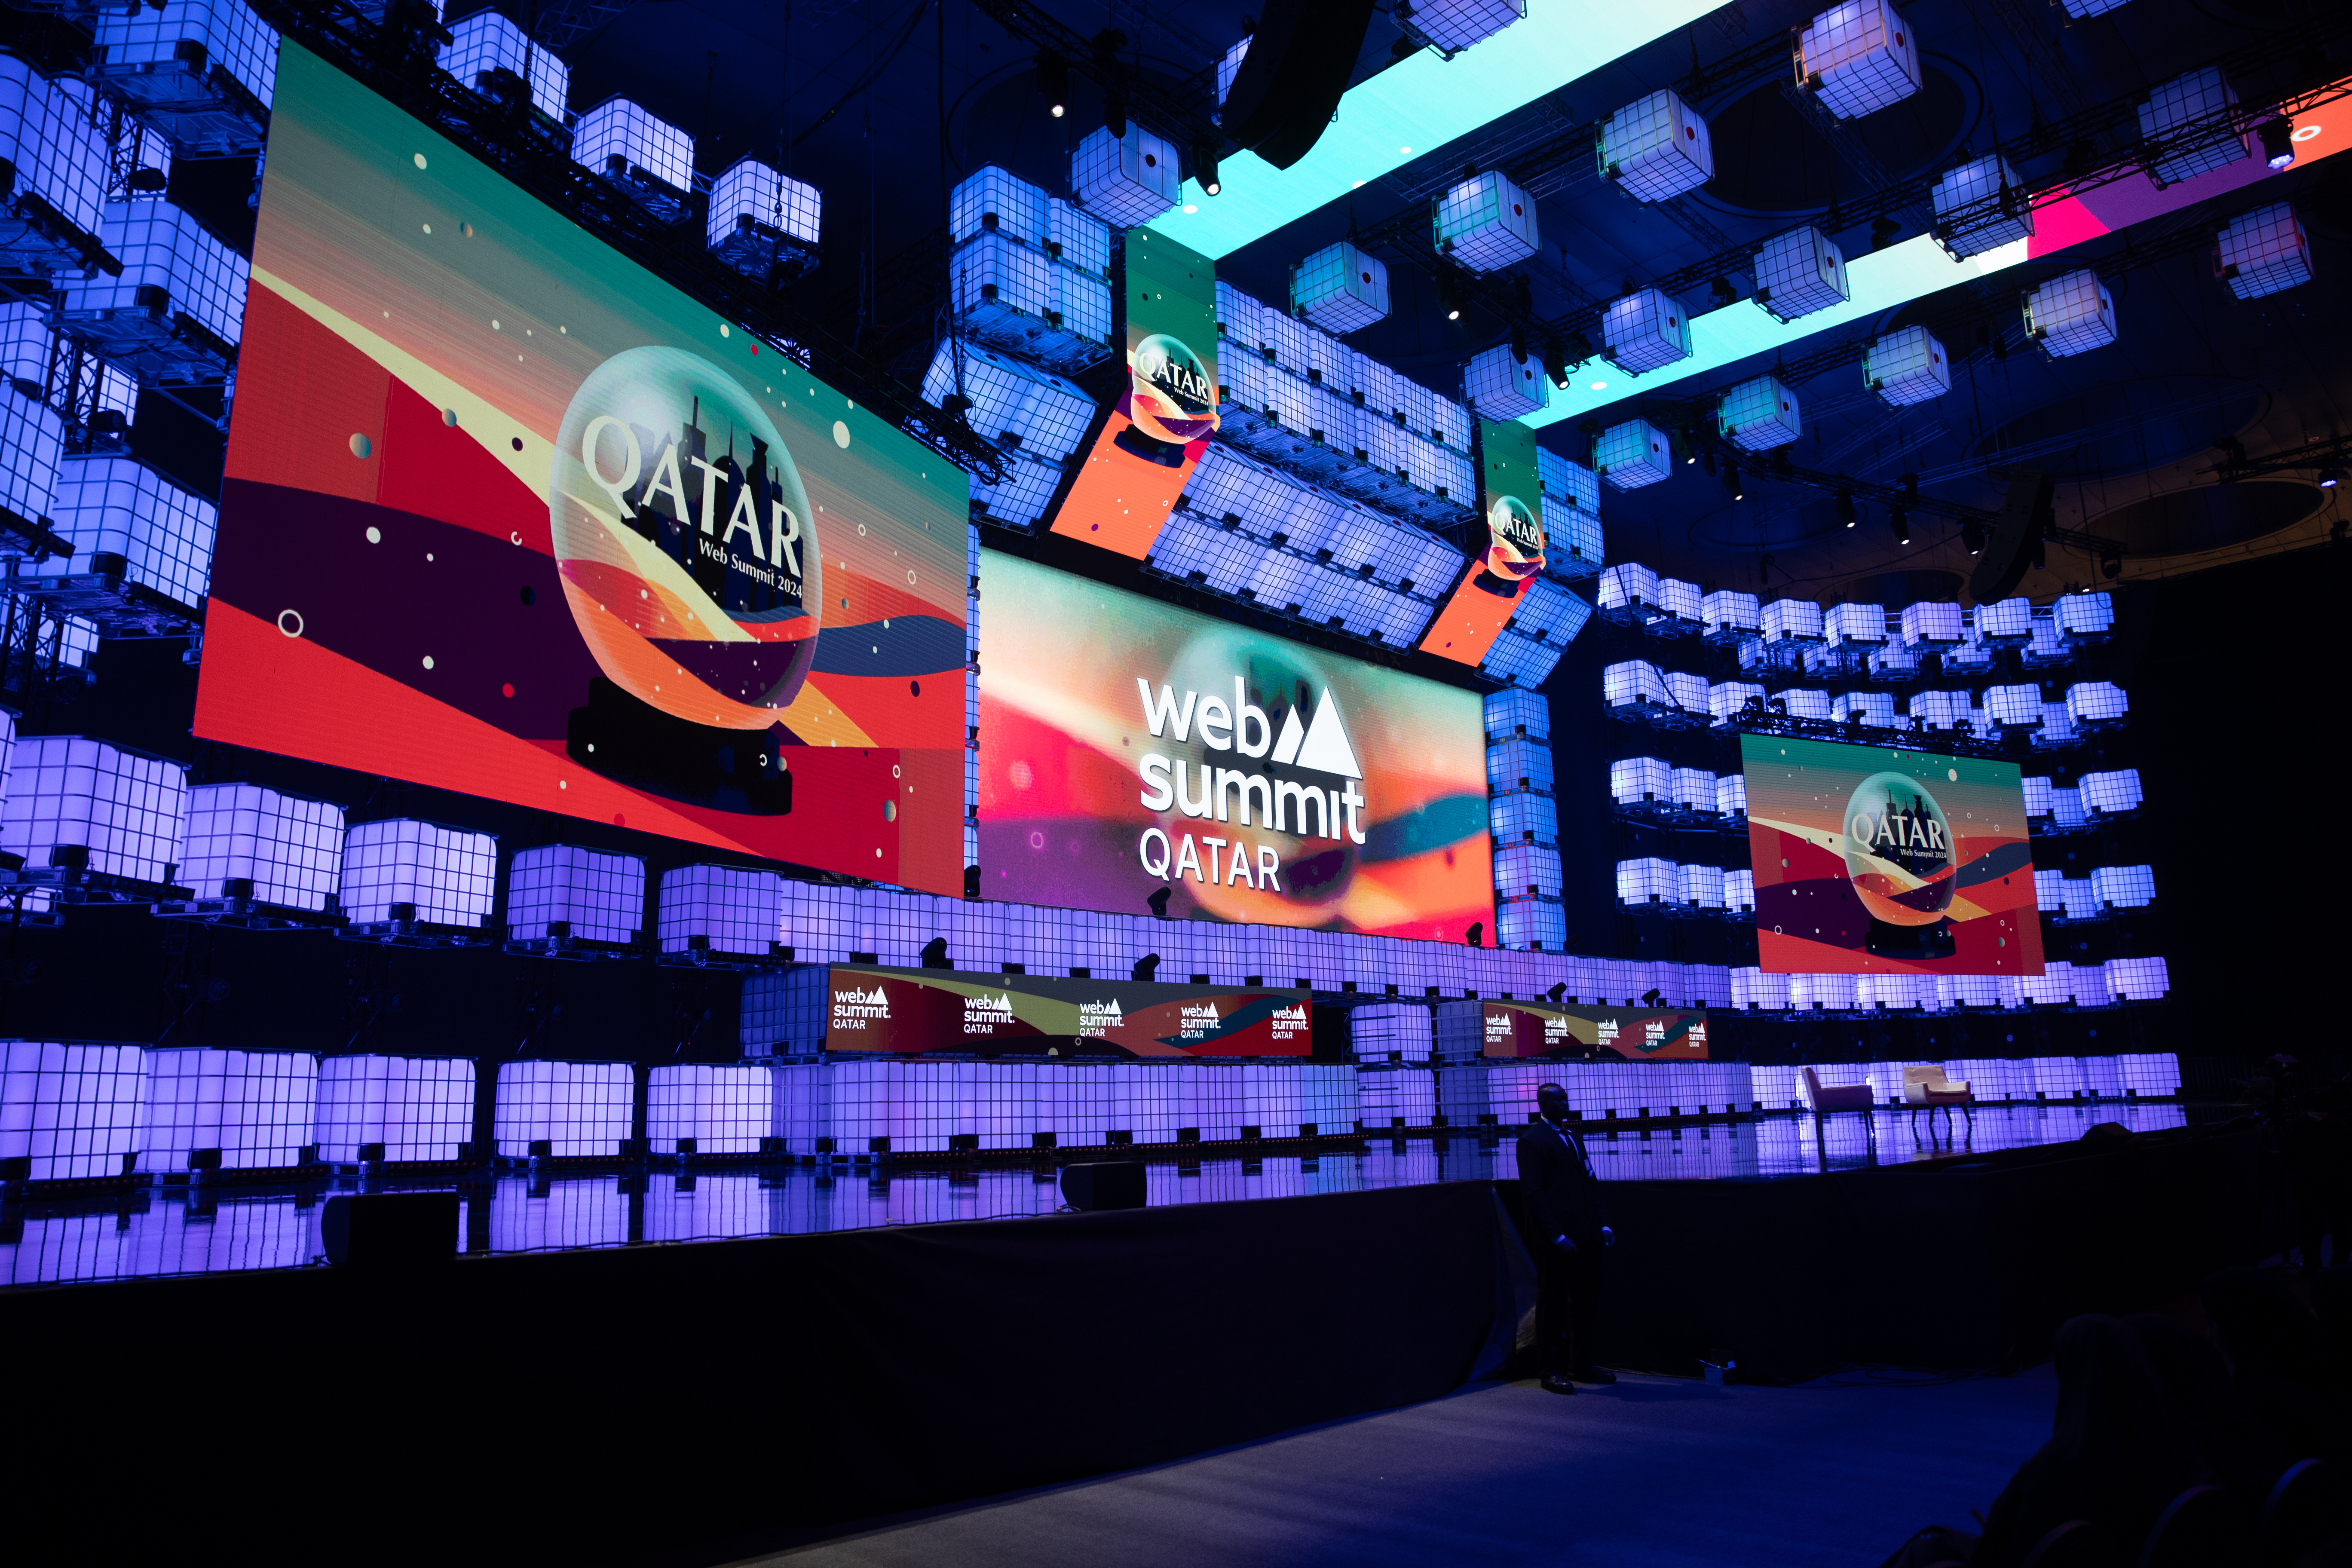 A photo of Centre Stage at Web Summit Qatar. There are three screens on the stage with the Web Summit Qatar logo visible.